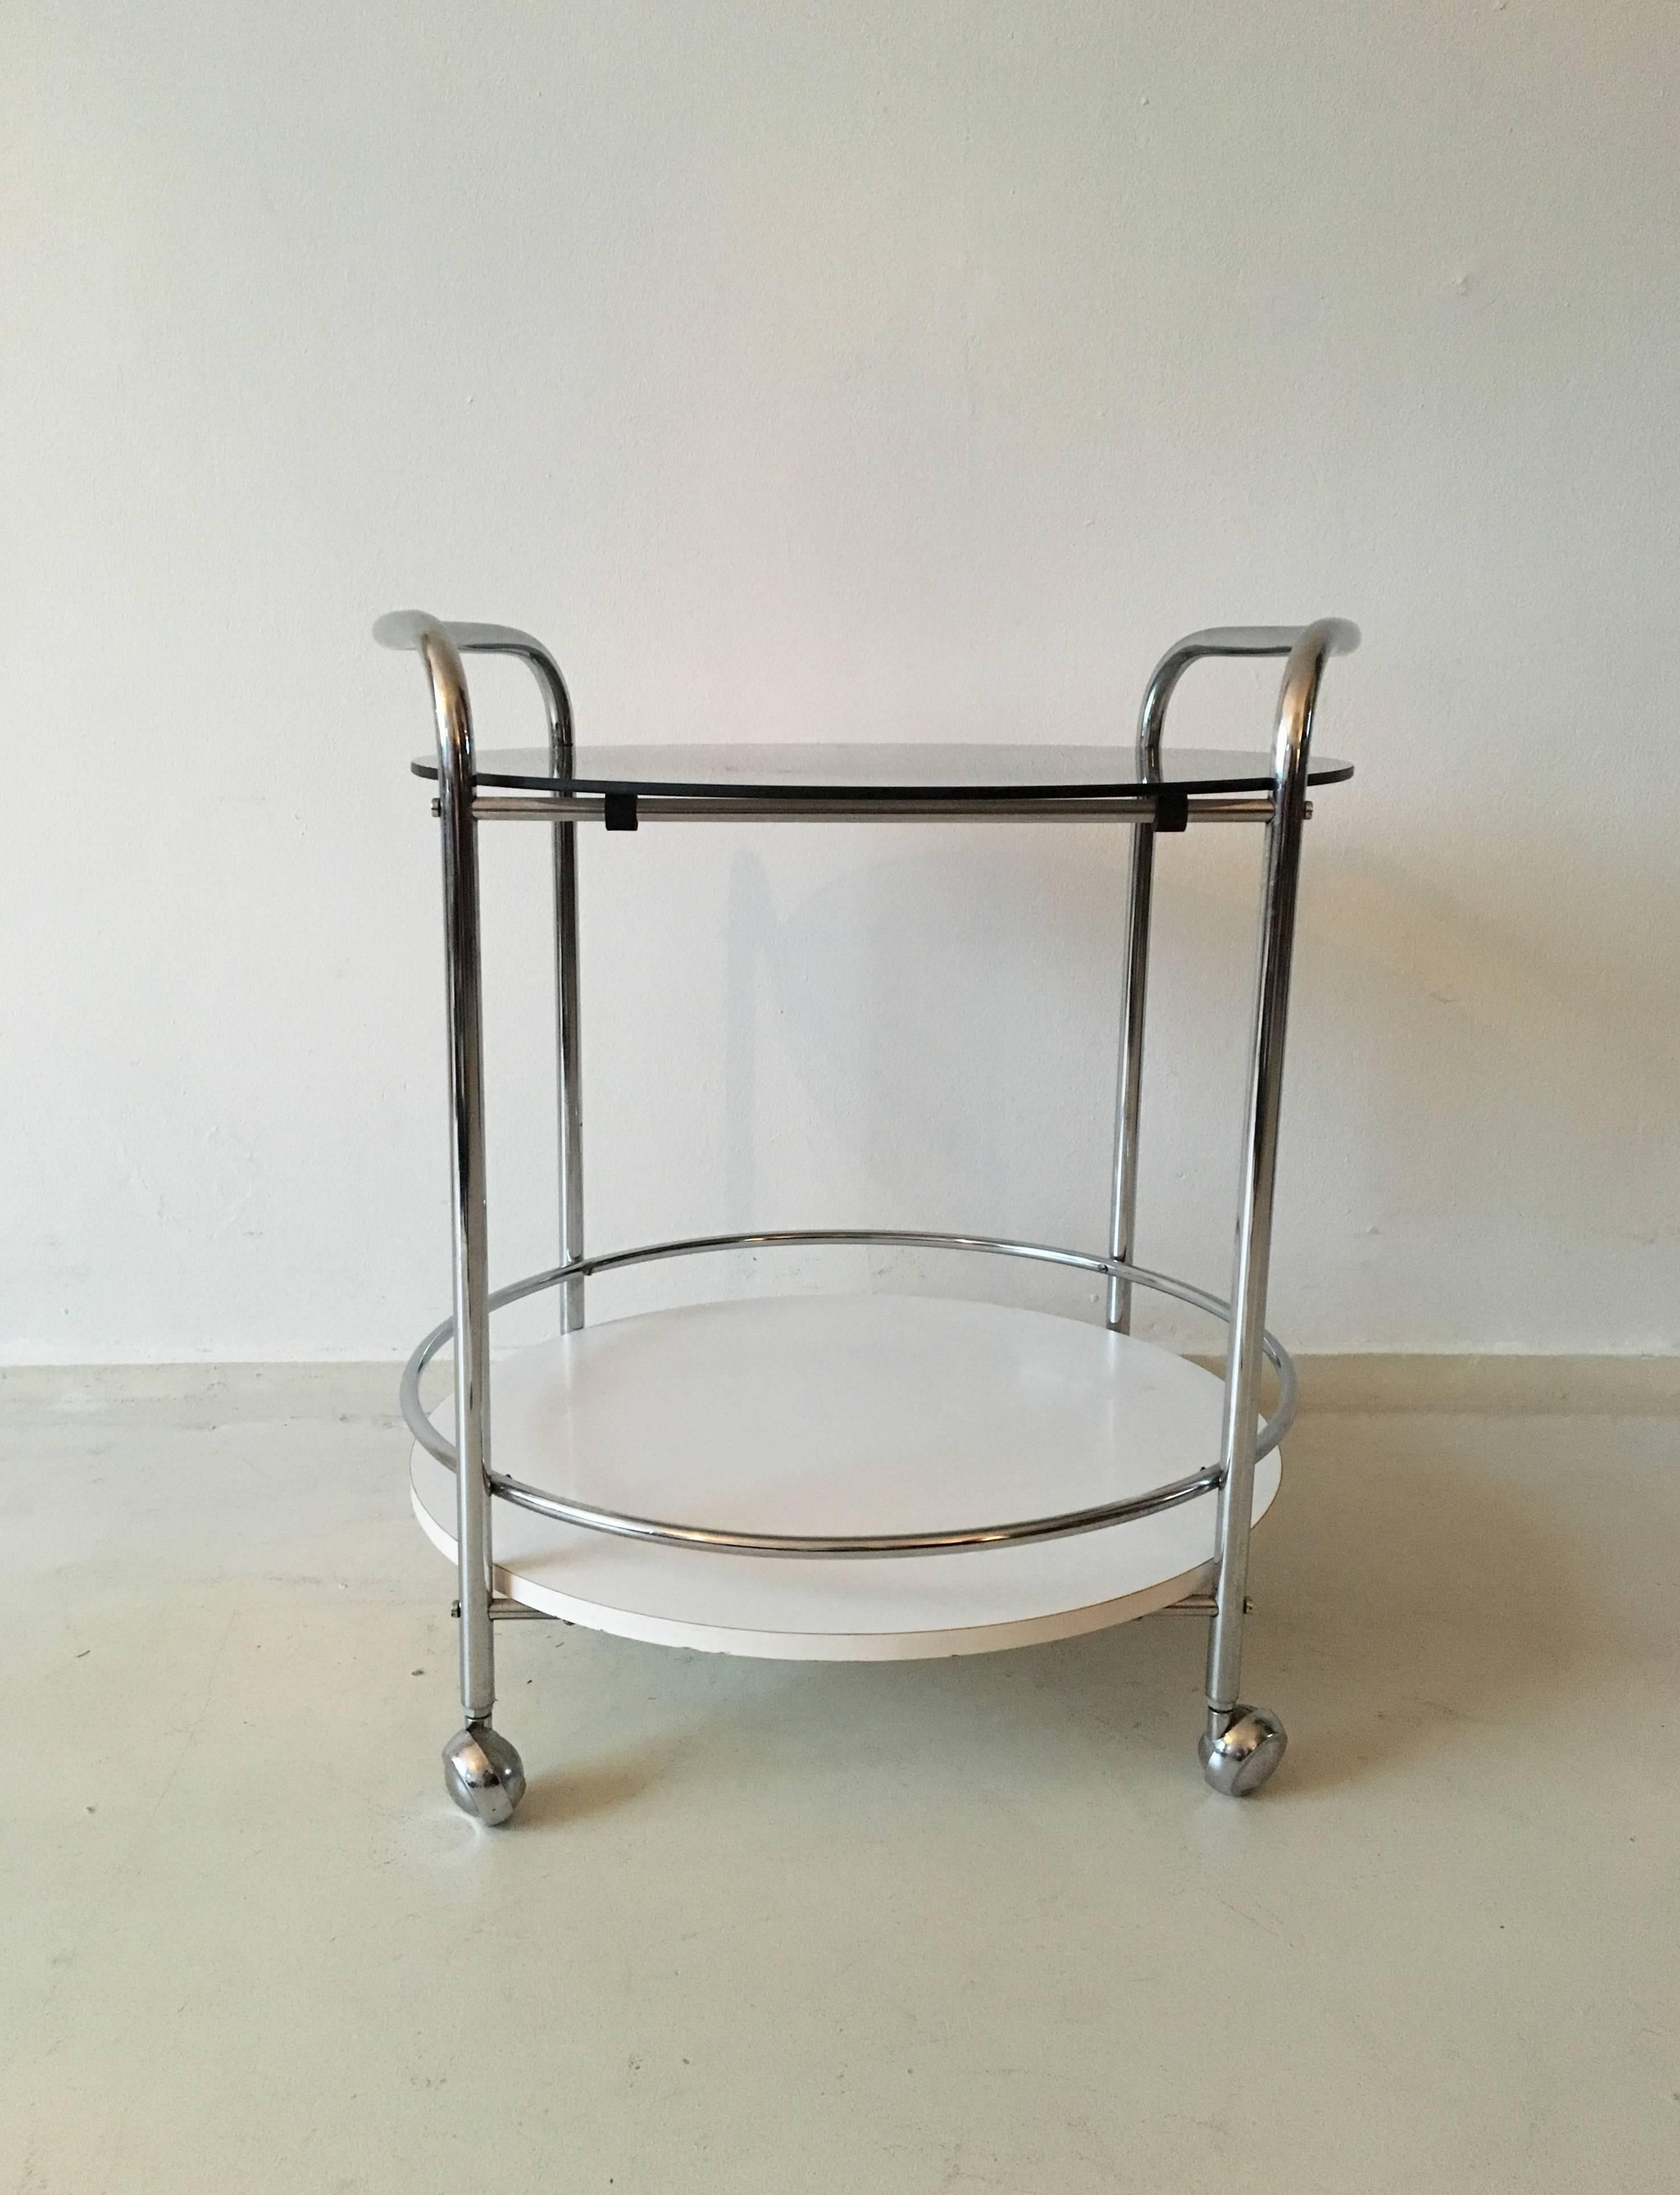 This Mid-Century Modernist trolley or bar cart consists of a chrome-plated tubular frame with one smoked glass top and one white veneered/laminated top in wood. Overall in a very good condition with some wear to the glass.